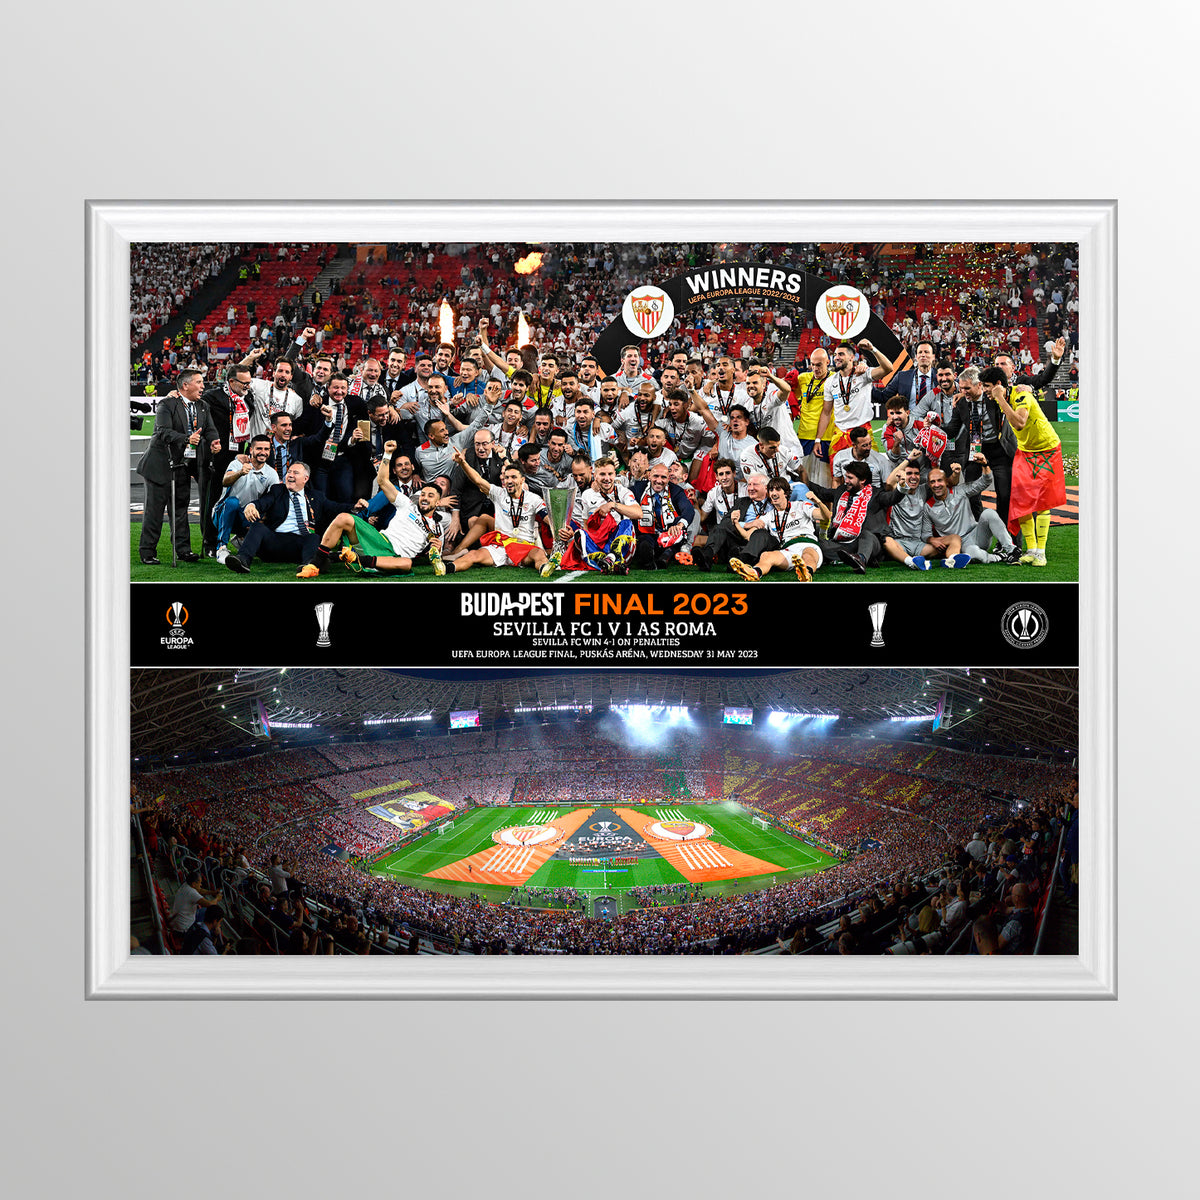 2023 UEFA Europa League Final Budapest Celebration Montage Featuring Trophy Lift and Panoramic Line Up